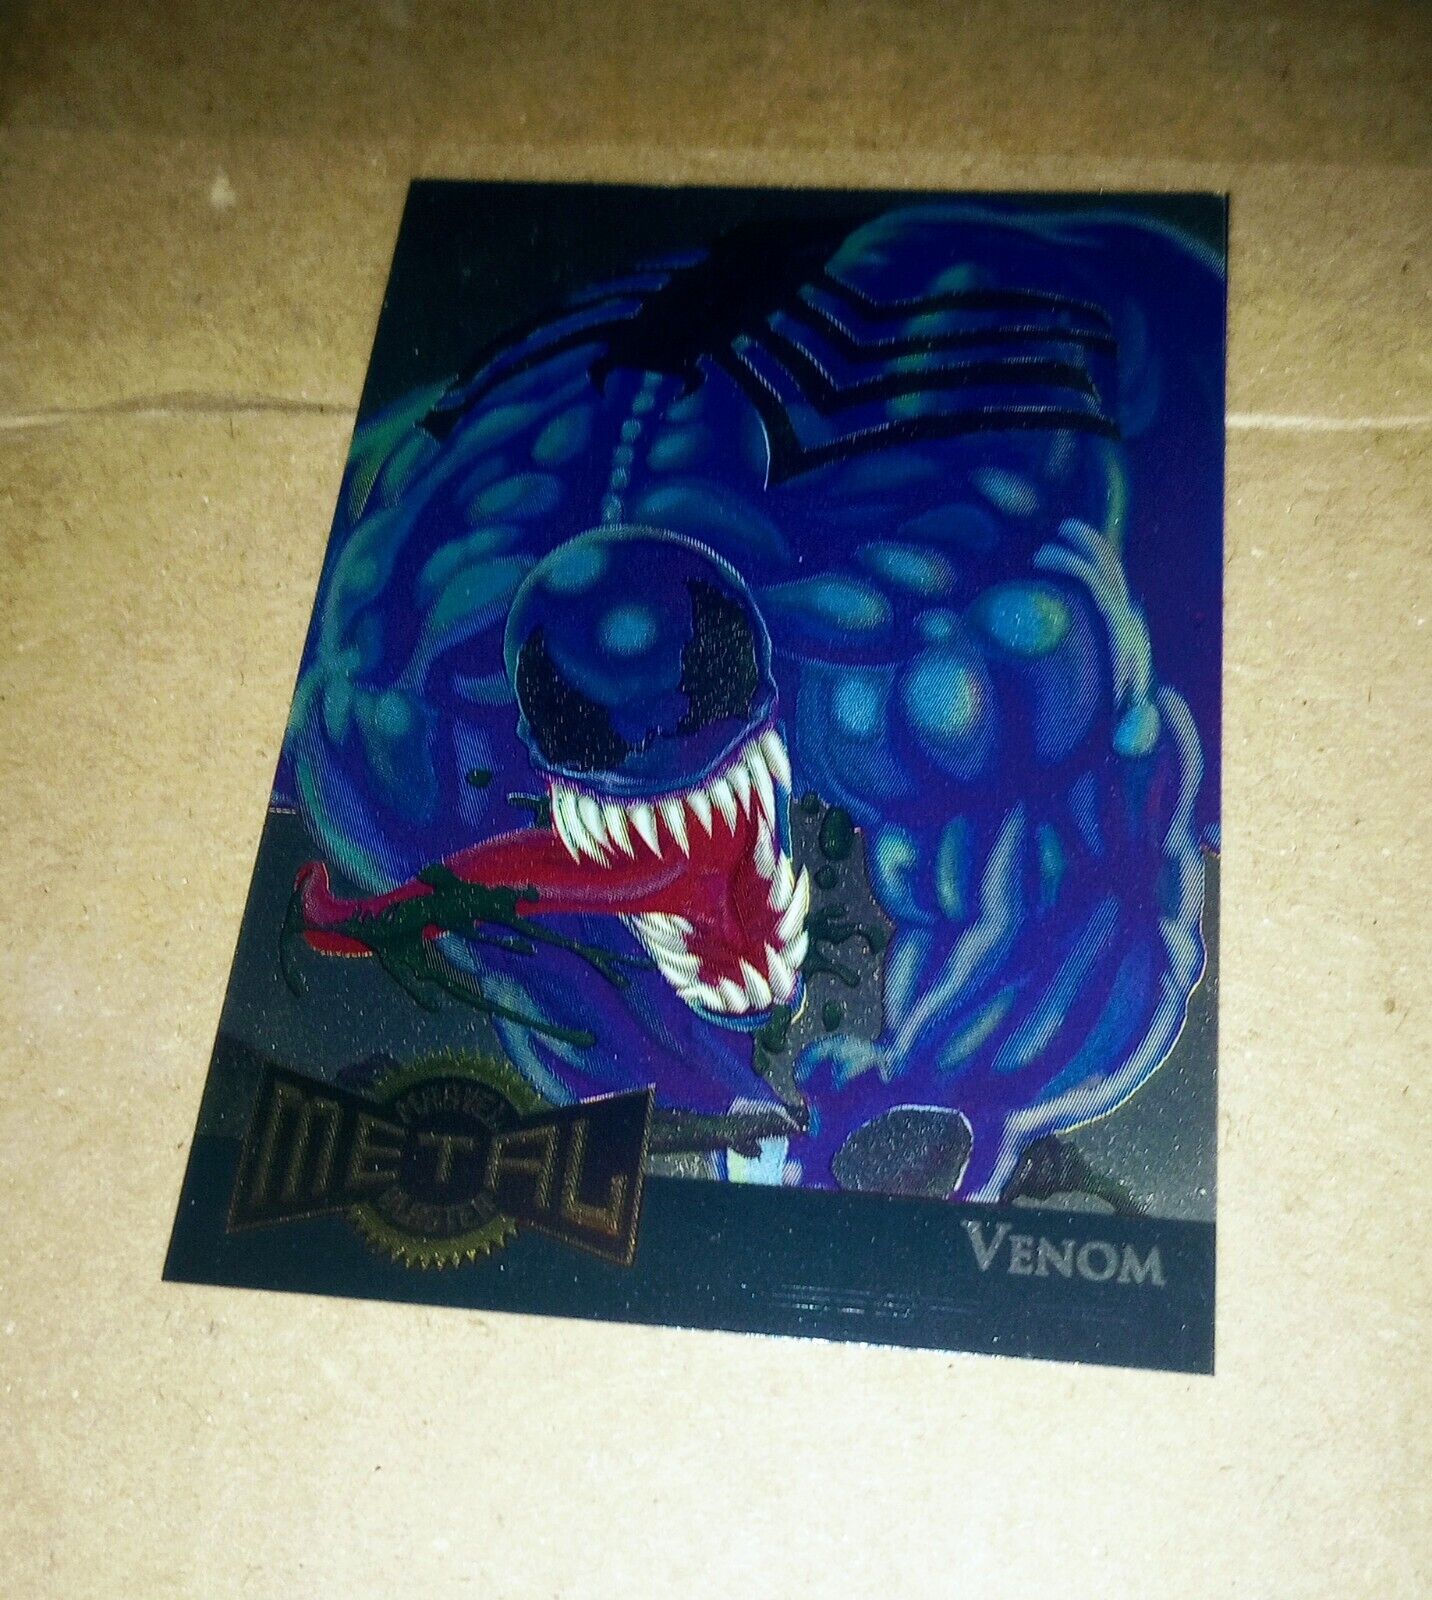 Mint Condition Venom Metal Trading Card  Not Been Out Of Plastic Since Purchased